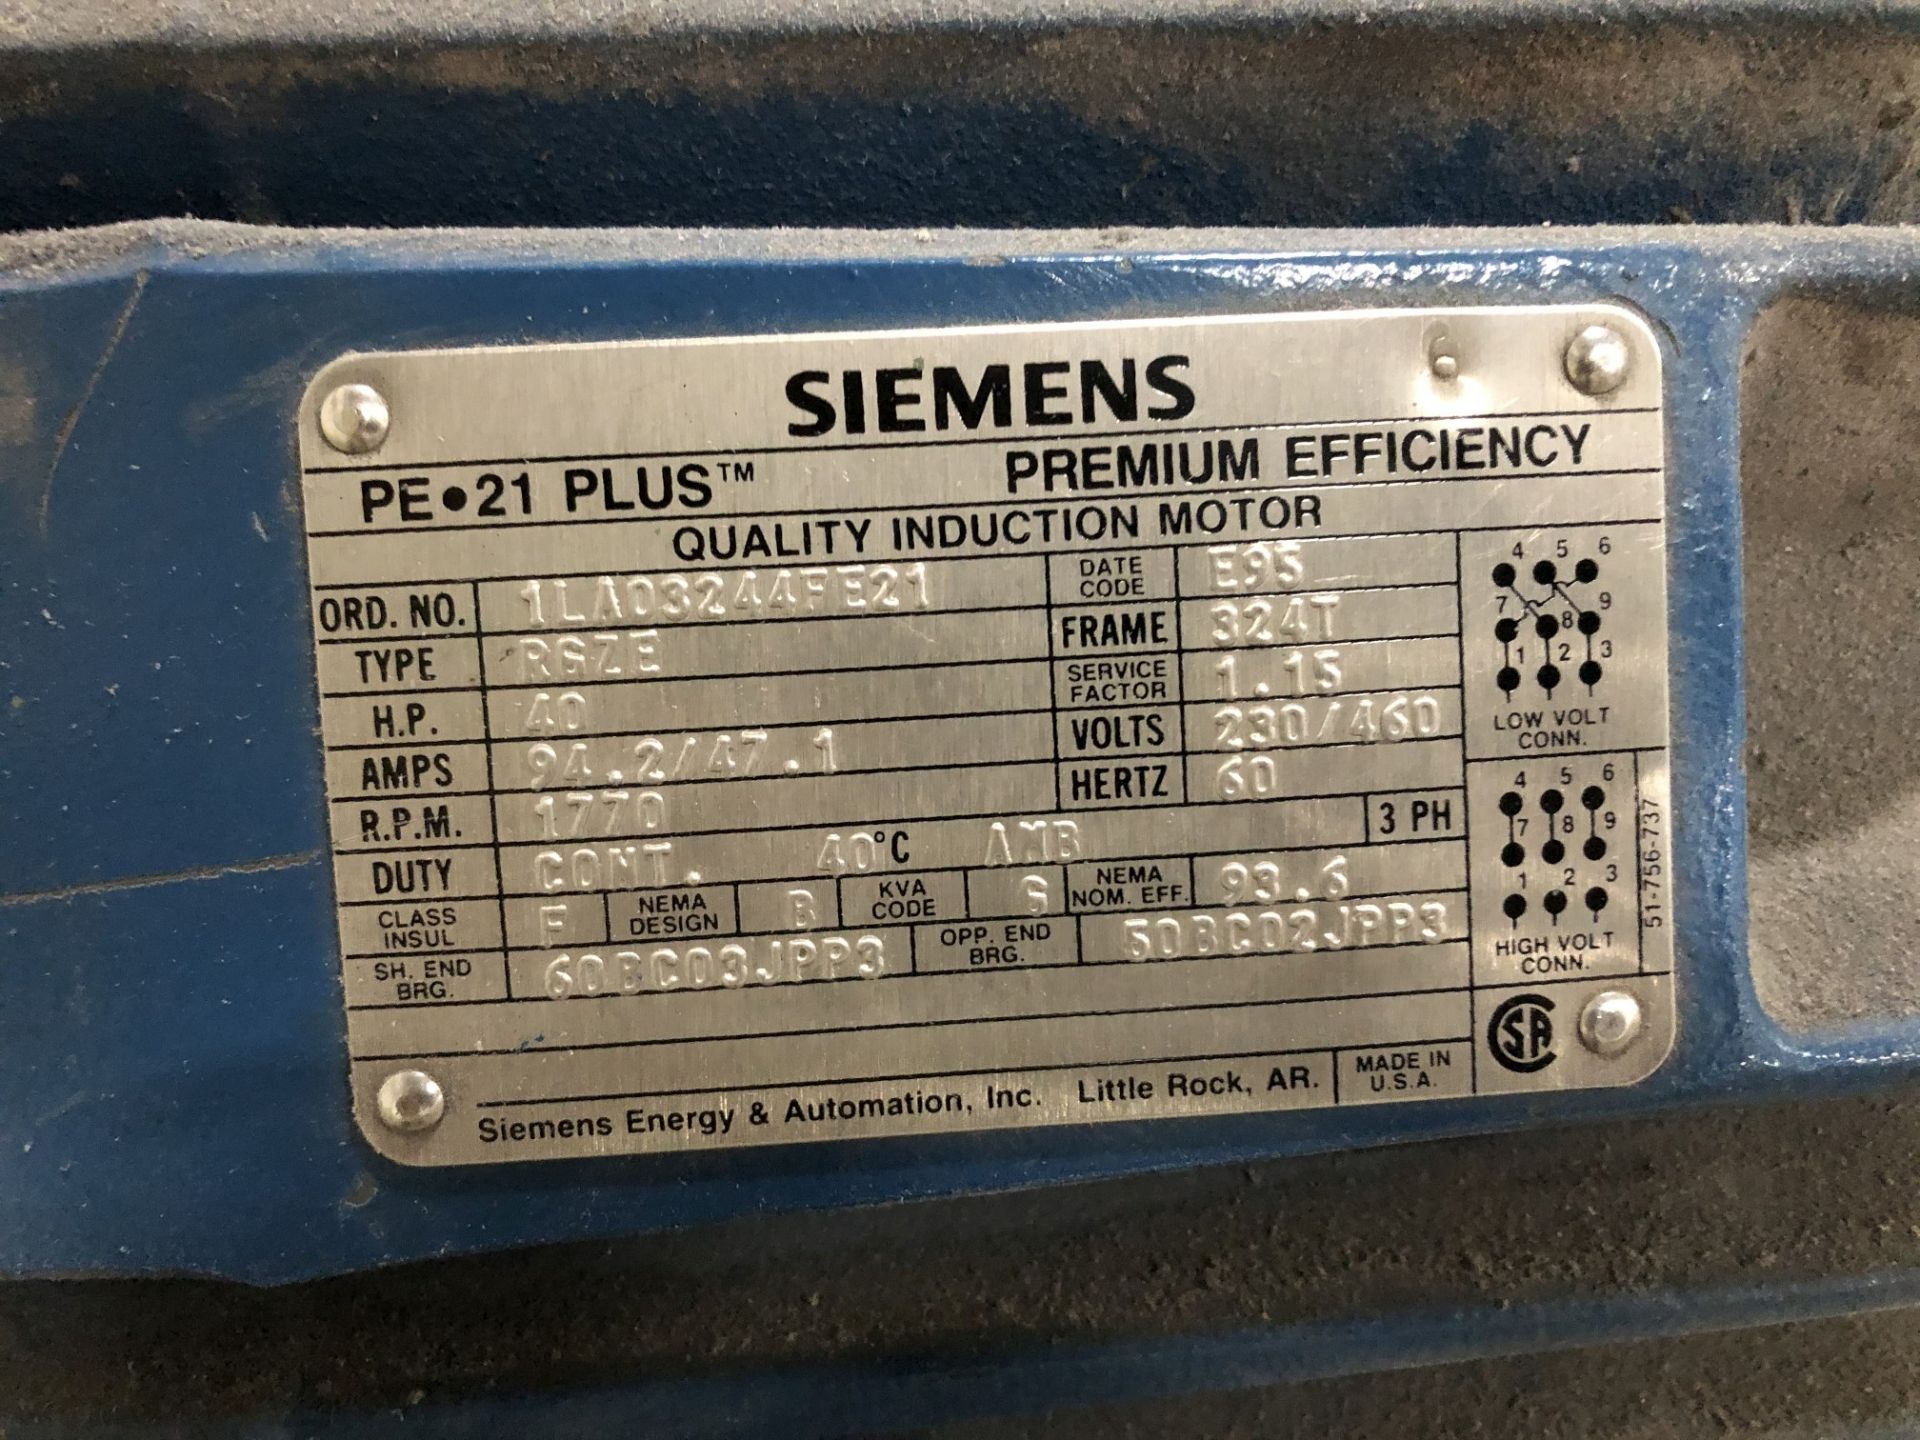 Siemens 40 HP Quality Induction Motor, Ord. No. 1LA03244FE21, Type RGZE - Image 3 of 3